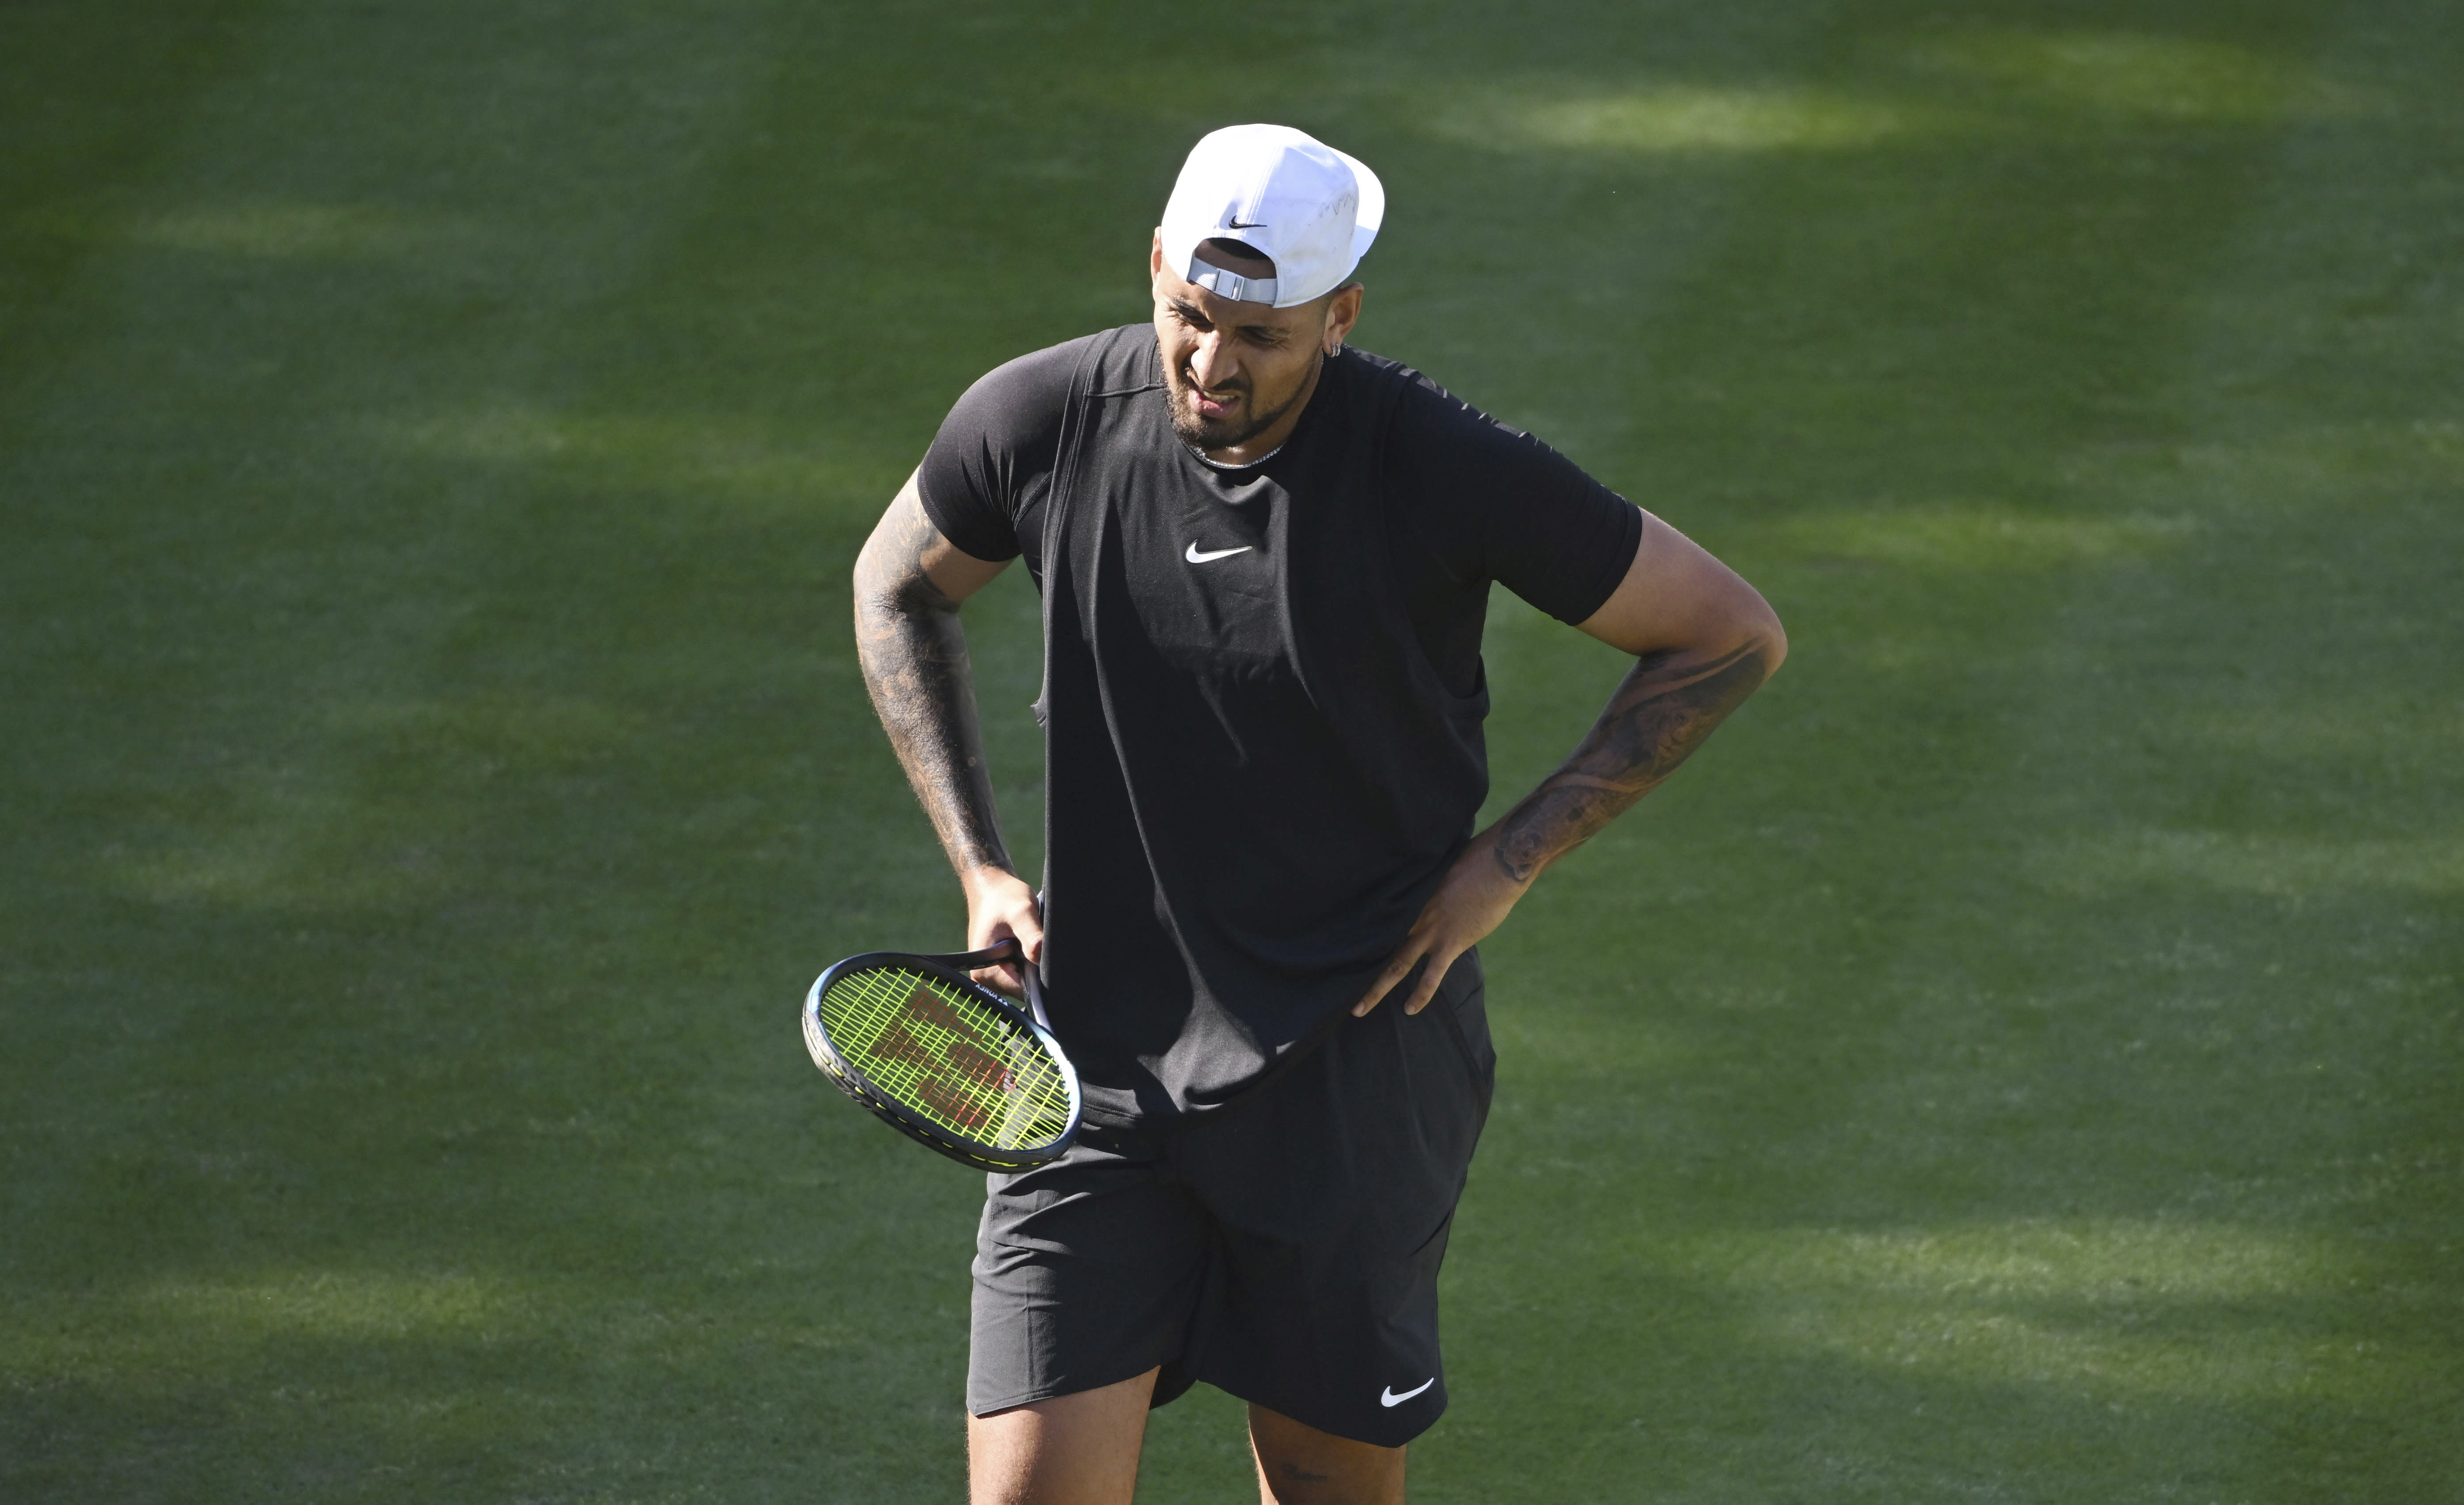 With Wimbledon on his mind, Nick Kyrgios pulls out of Halle to give